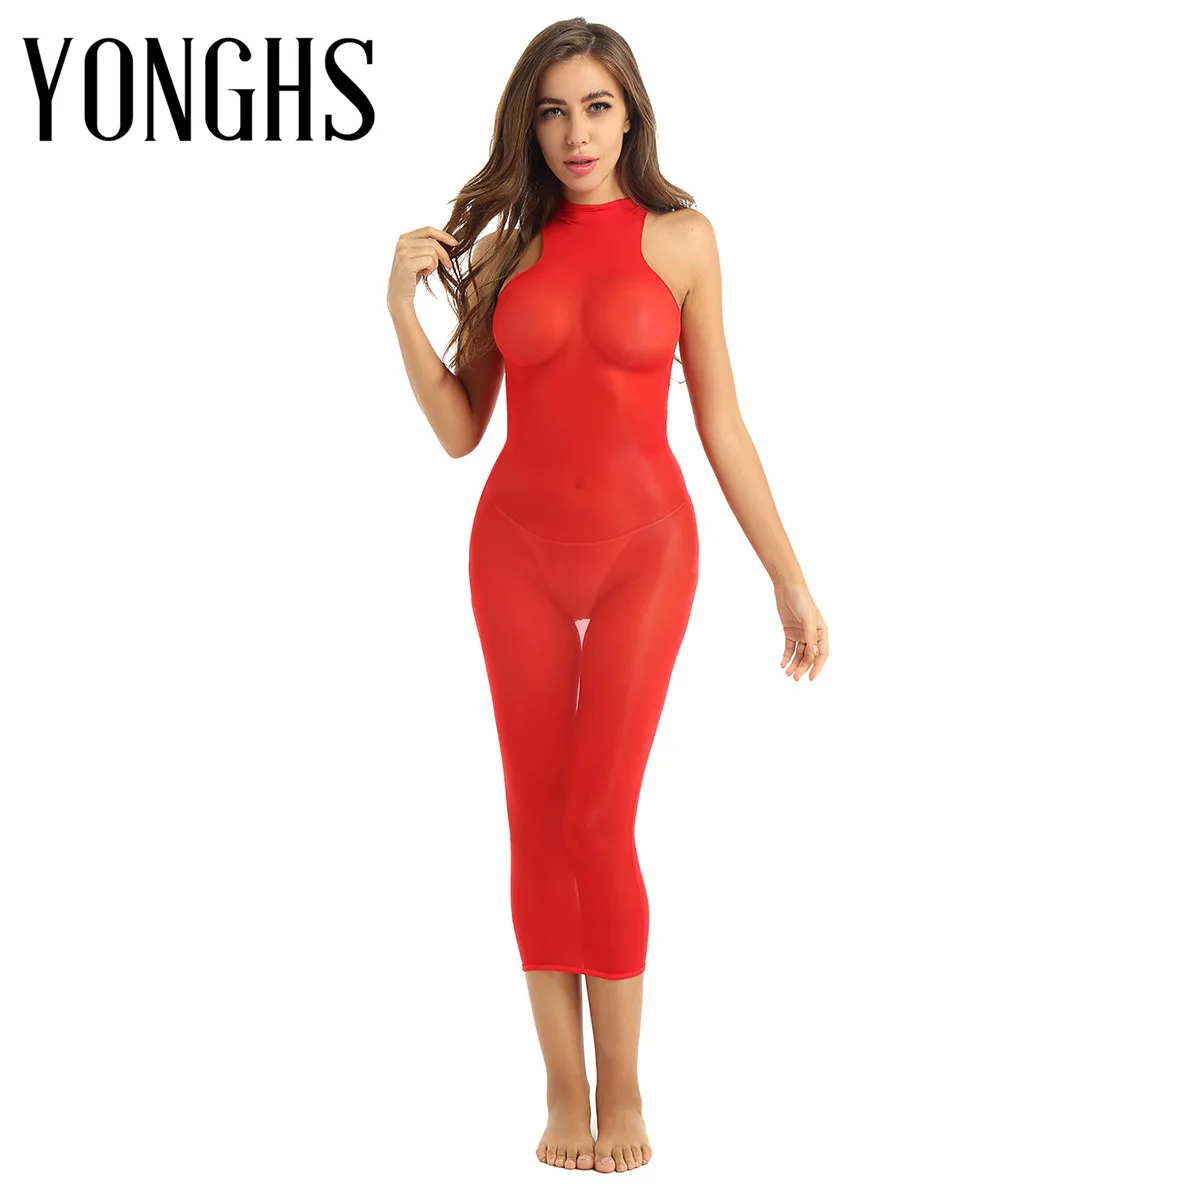 

Womens Lingerie Hot Mni Bodycon Stocking Dress Ultra-thin Silky See Through Sheer Round Neck Sleeveless Stretchy Sexy Nightwear